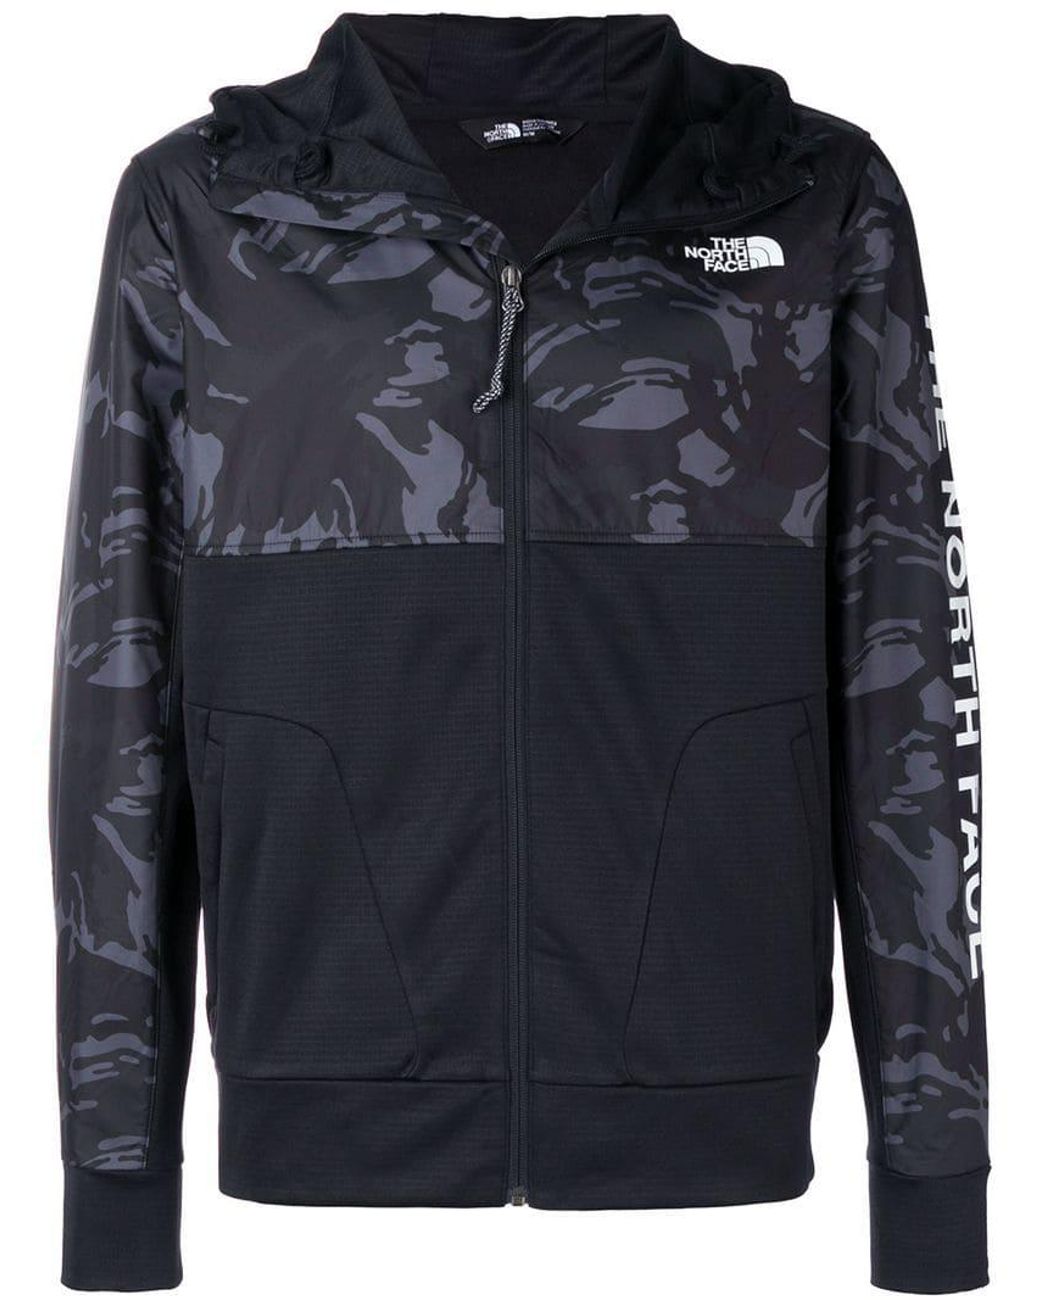 The North Face Train N Logo Overlay Jacket in Black for Men | Lyst UK